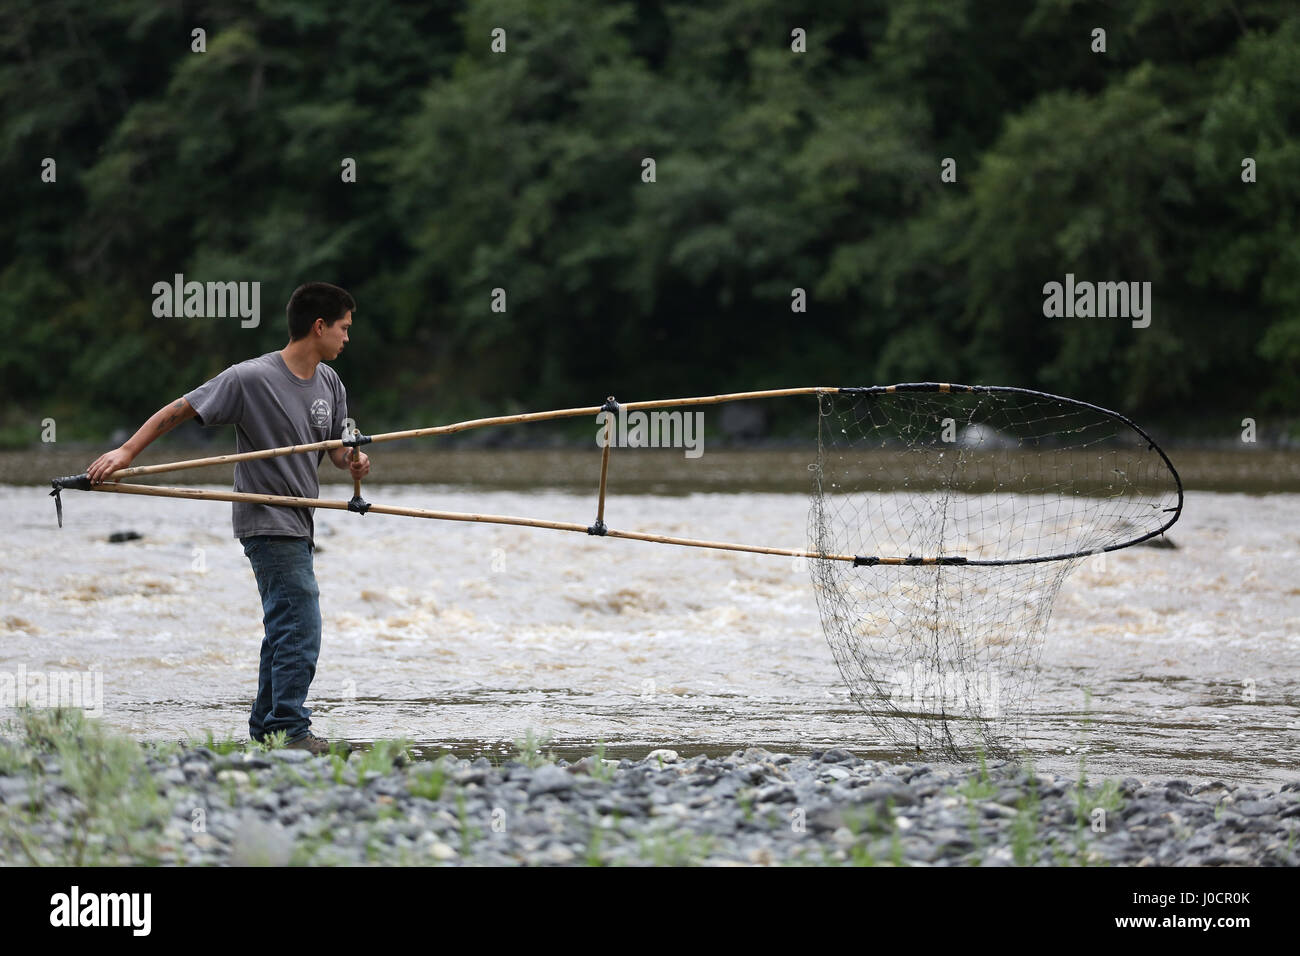 A member of the Yurok Indian Tribe uses a dip net to fish for salmon on the  Klamath River on July 11, 2015. Yurok Indian Reservation, California, Unit  Stock Photo - Alamy